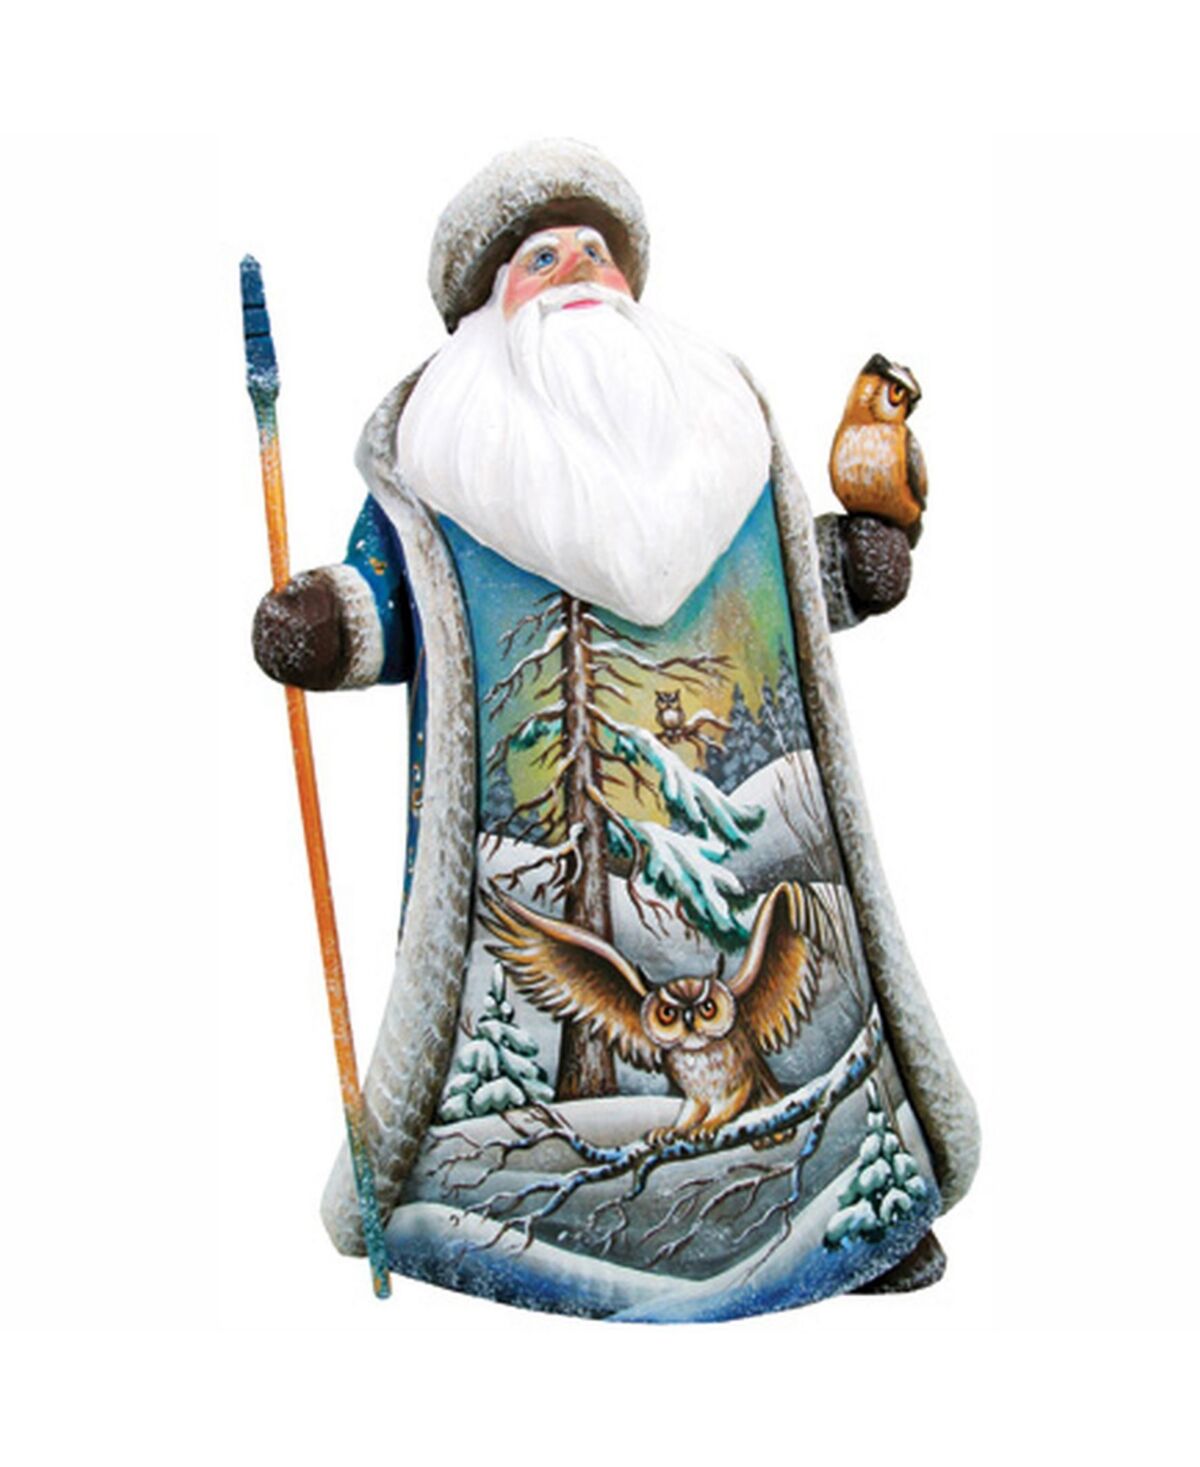 G.DeBrekht Woodcarved and Hand Painted Santa of All Wilderness Figurine - Multi